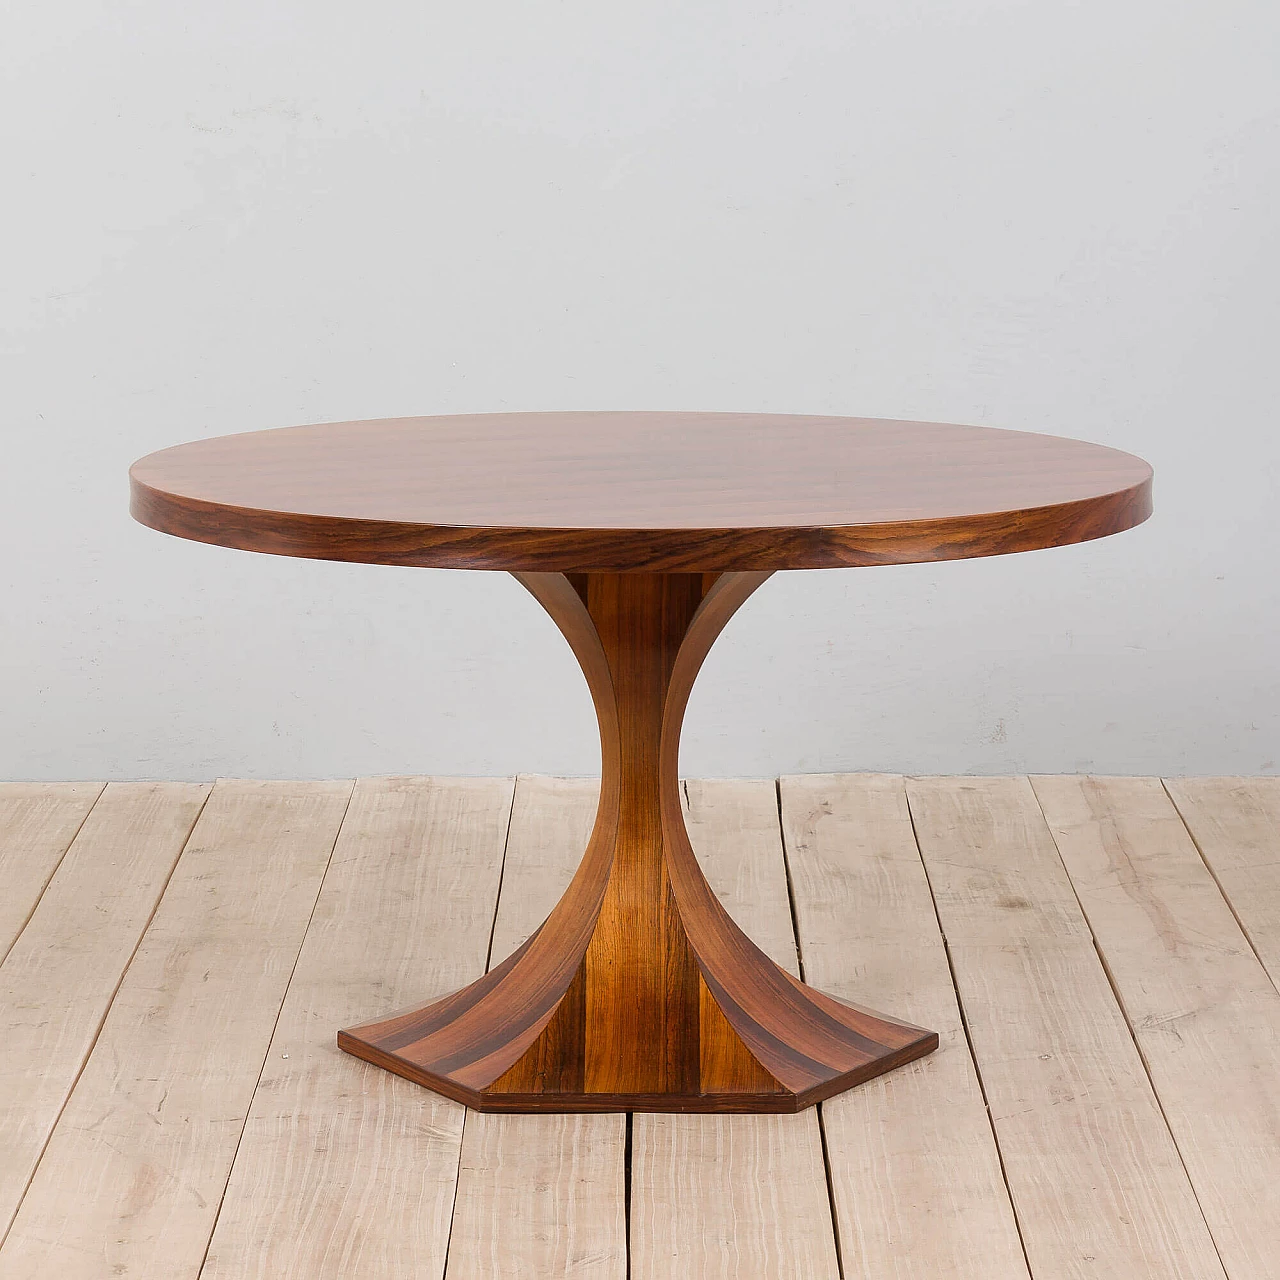 Clessidra round rosewood table by Carlo De Carli, 1960s 1365019